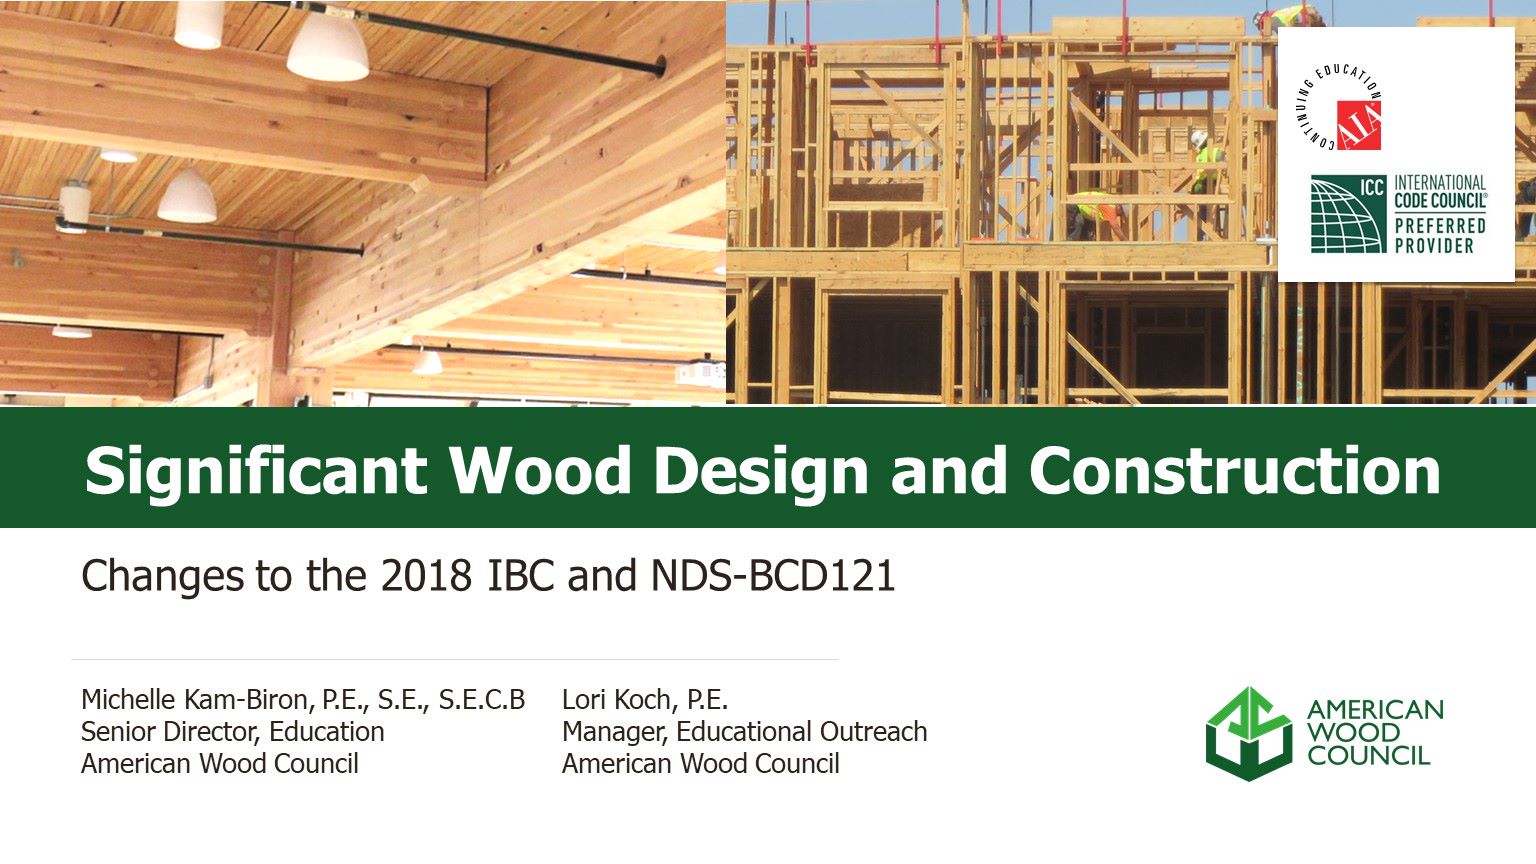 Significant Wood Design and Construction Changes to the 2018 IBC and NDS